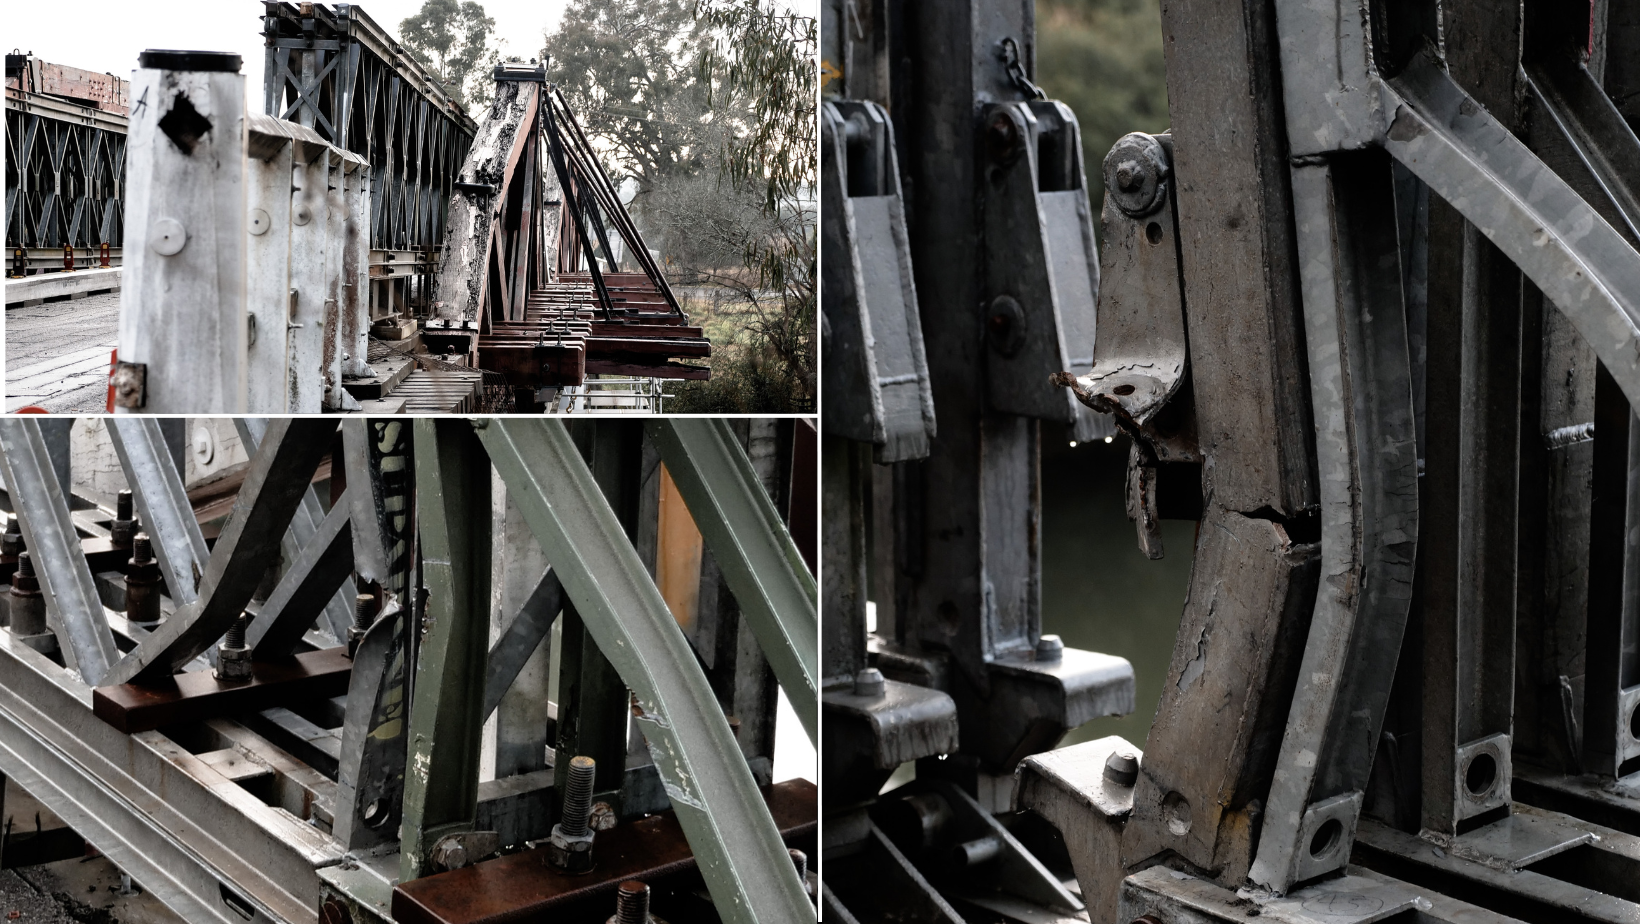 A collage of images showing damaged metal and wood on the Brig O'Johnstone bridge.